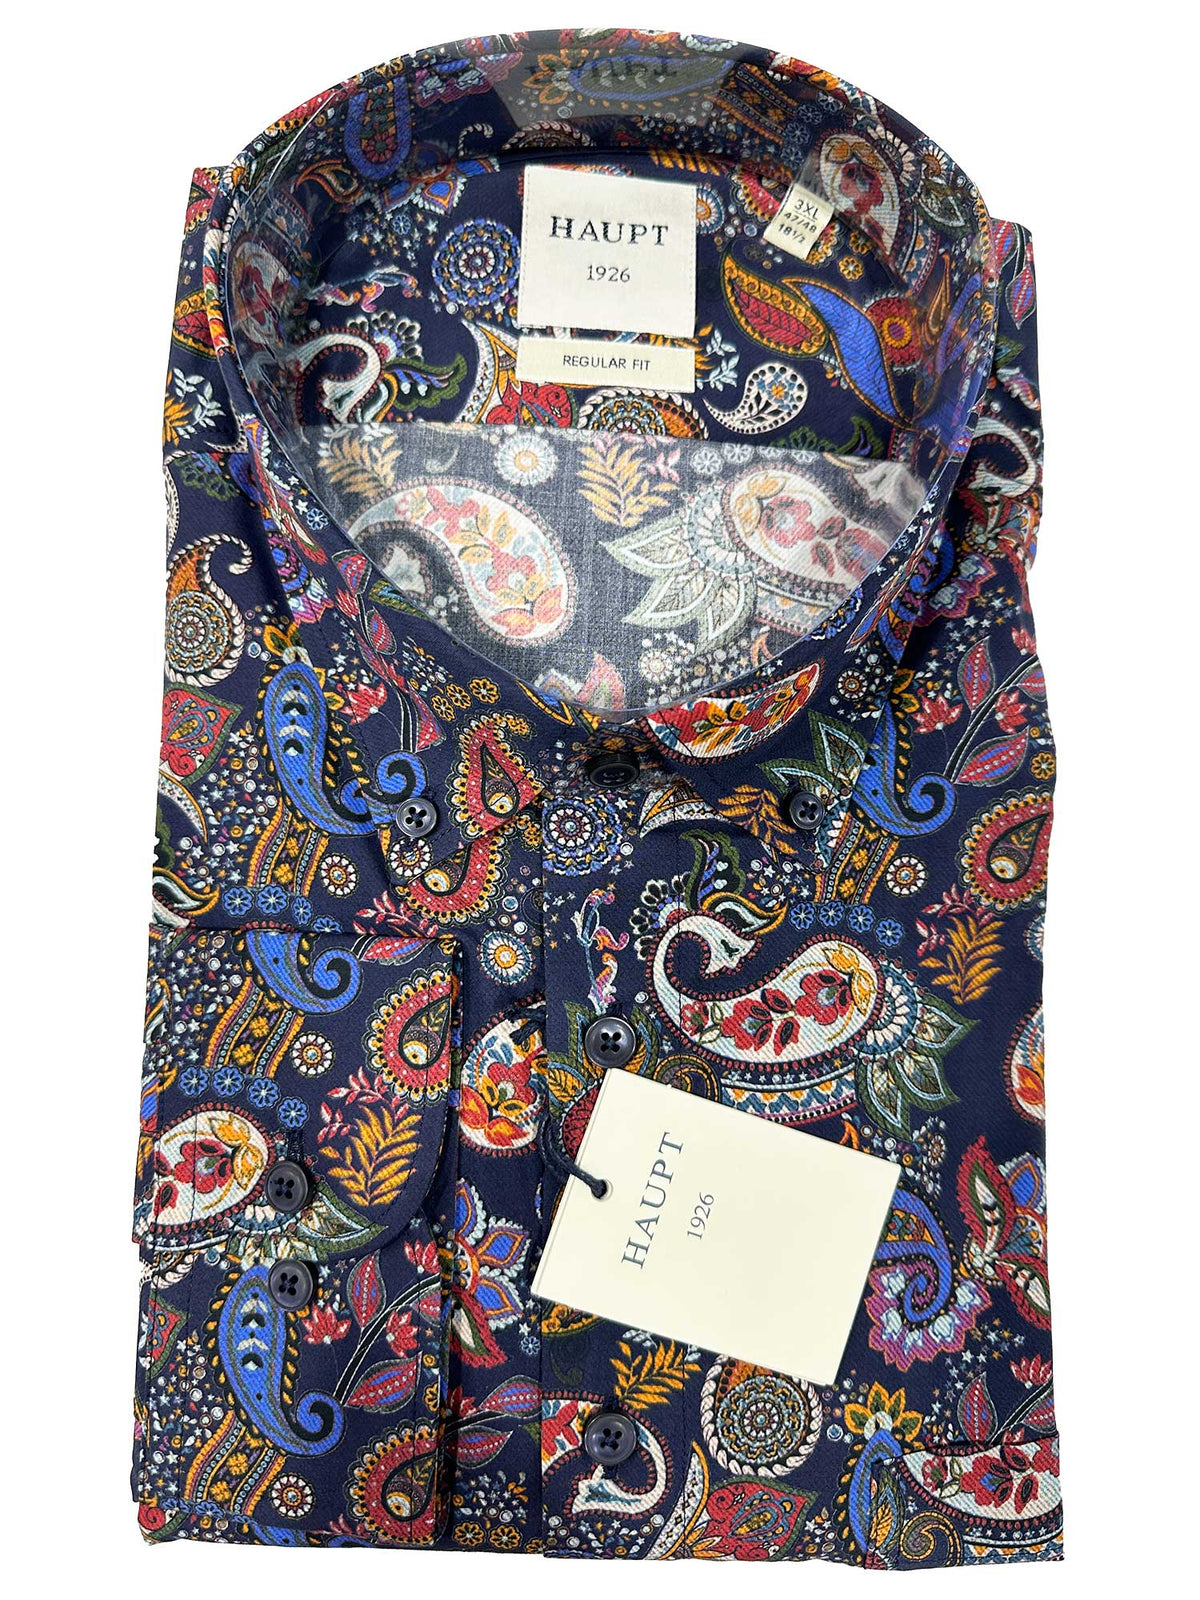 1455-19  https://harrysformenswear.com.au/products/1455-19  For almost a century, Haupt Fashion Group has been producing quality and creative textiles. Our collections are designed for quality and comfort, resulting in unique details. Well-known worldwide, we now deliver to Harrys. All Cotton Flanell Designed in Europe Modern Fit Chest Pocket